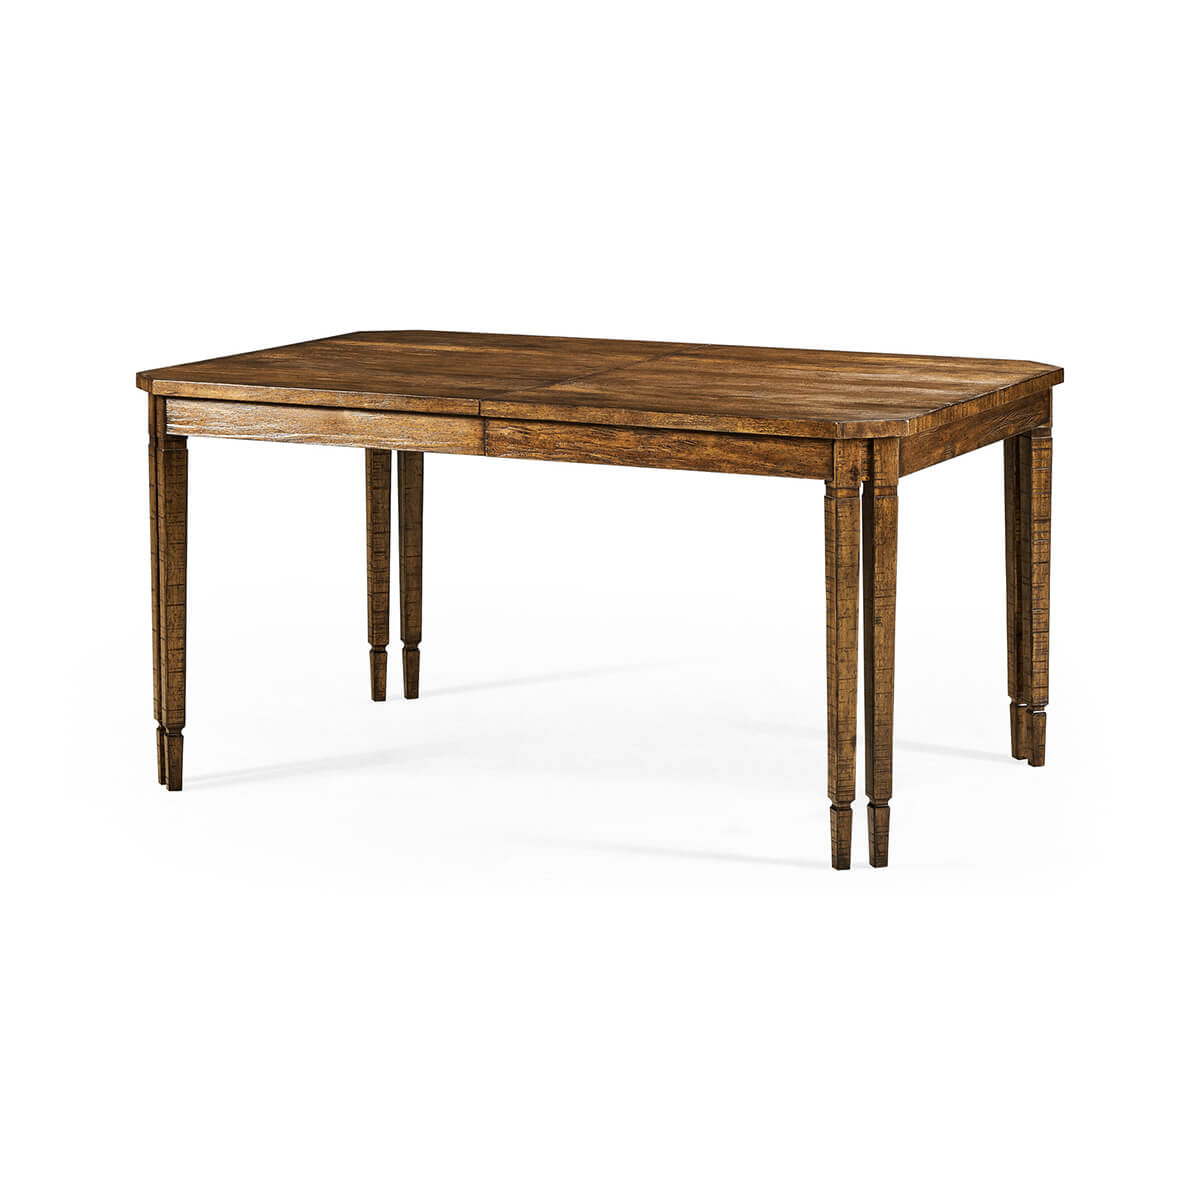 Rustic Country Walnut Extension Dining Table - English Georgian America